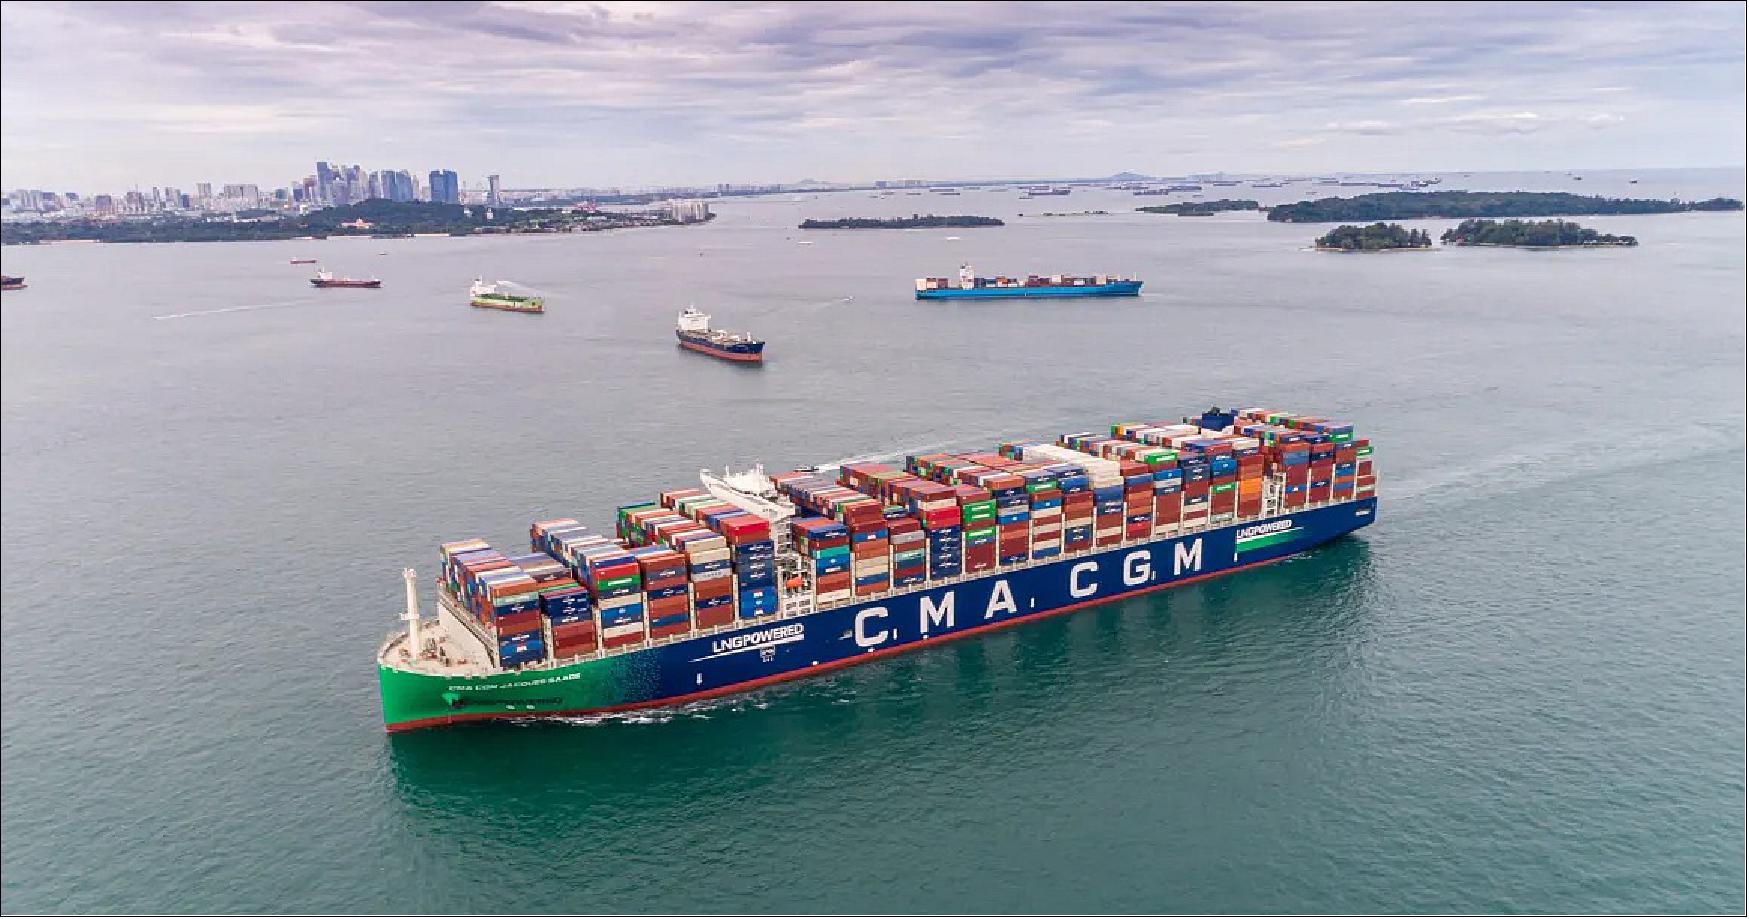 Figure 102: The CMA CGM vessels will be fitted with a broad range of Wärtsilä engines, systems and solutions (image source: CMA CGM)